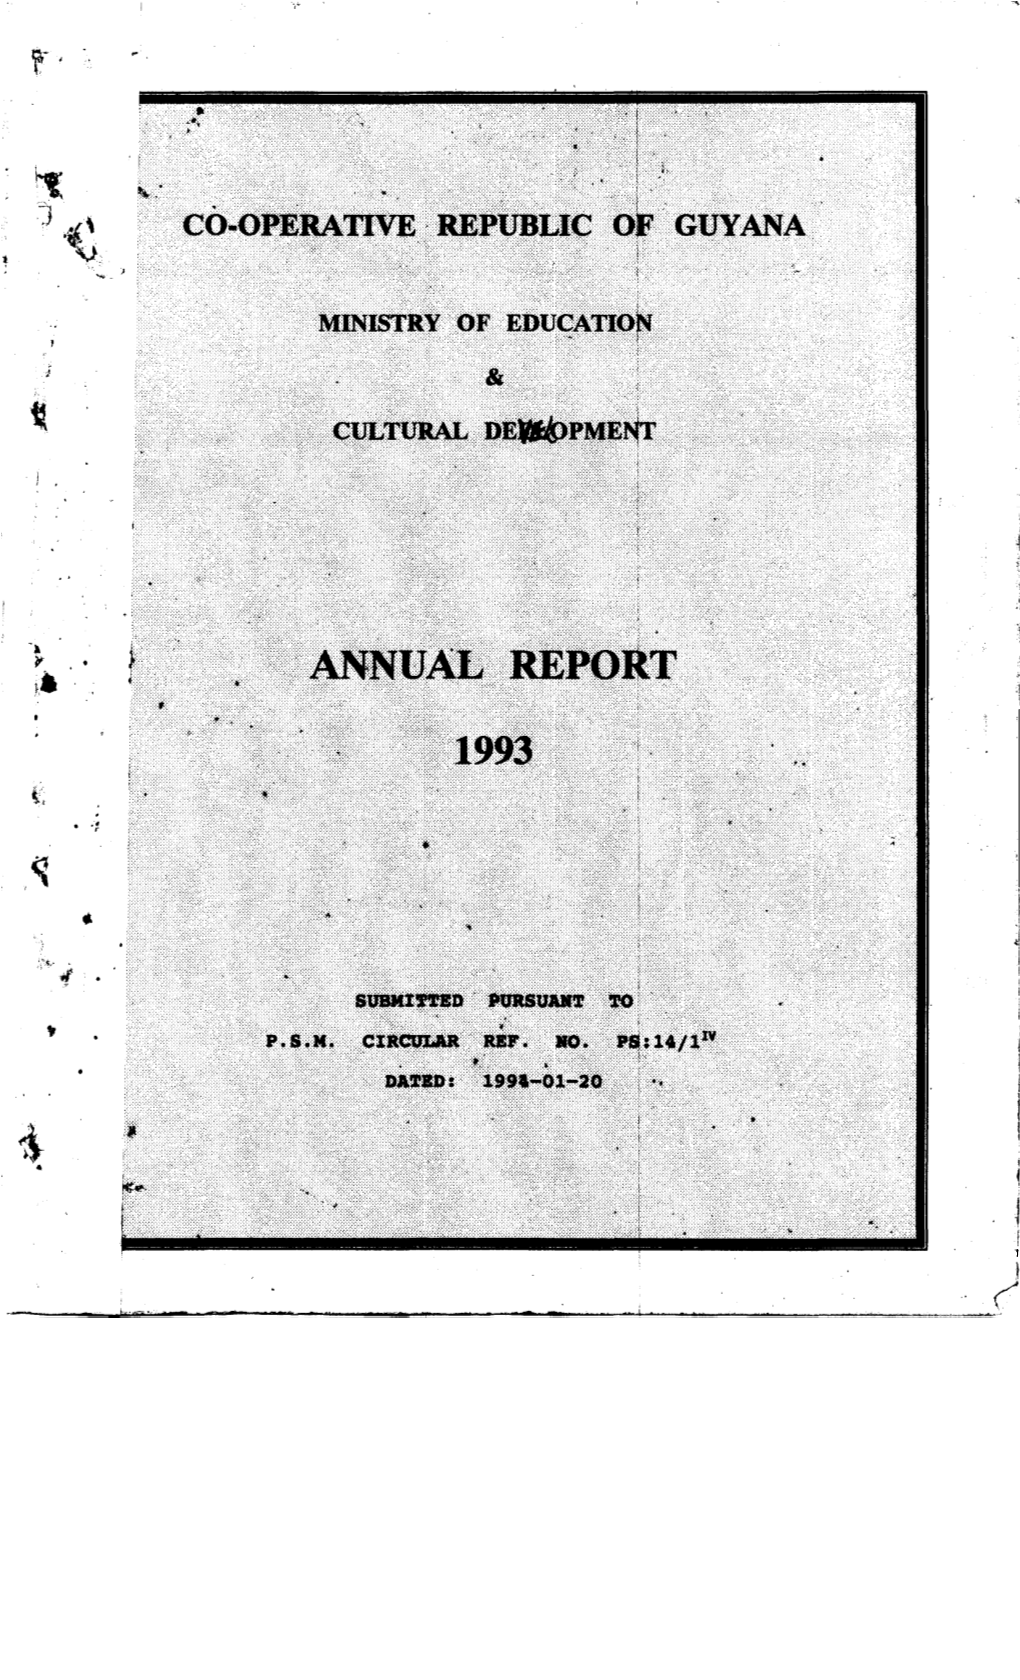 Annual Report Ministry of Education and Cultural